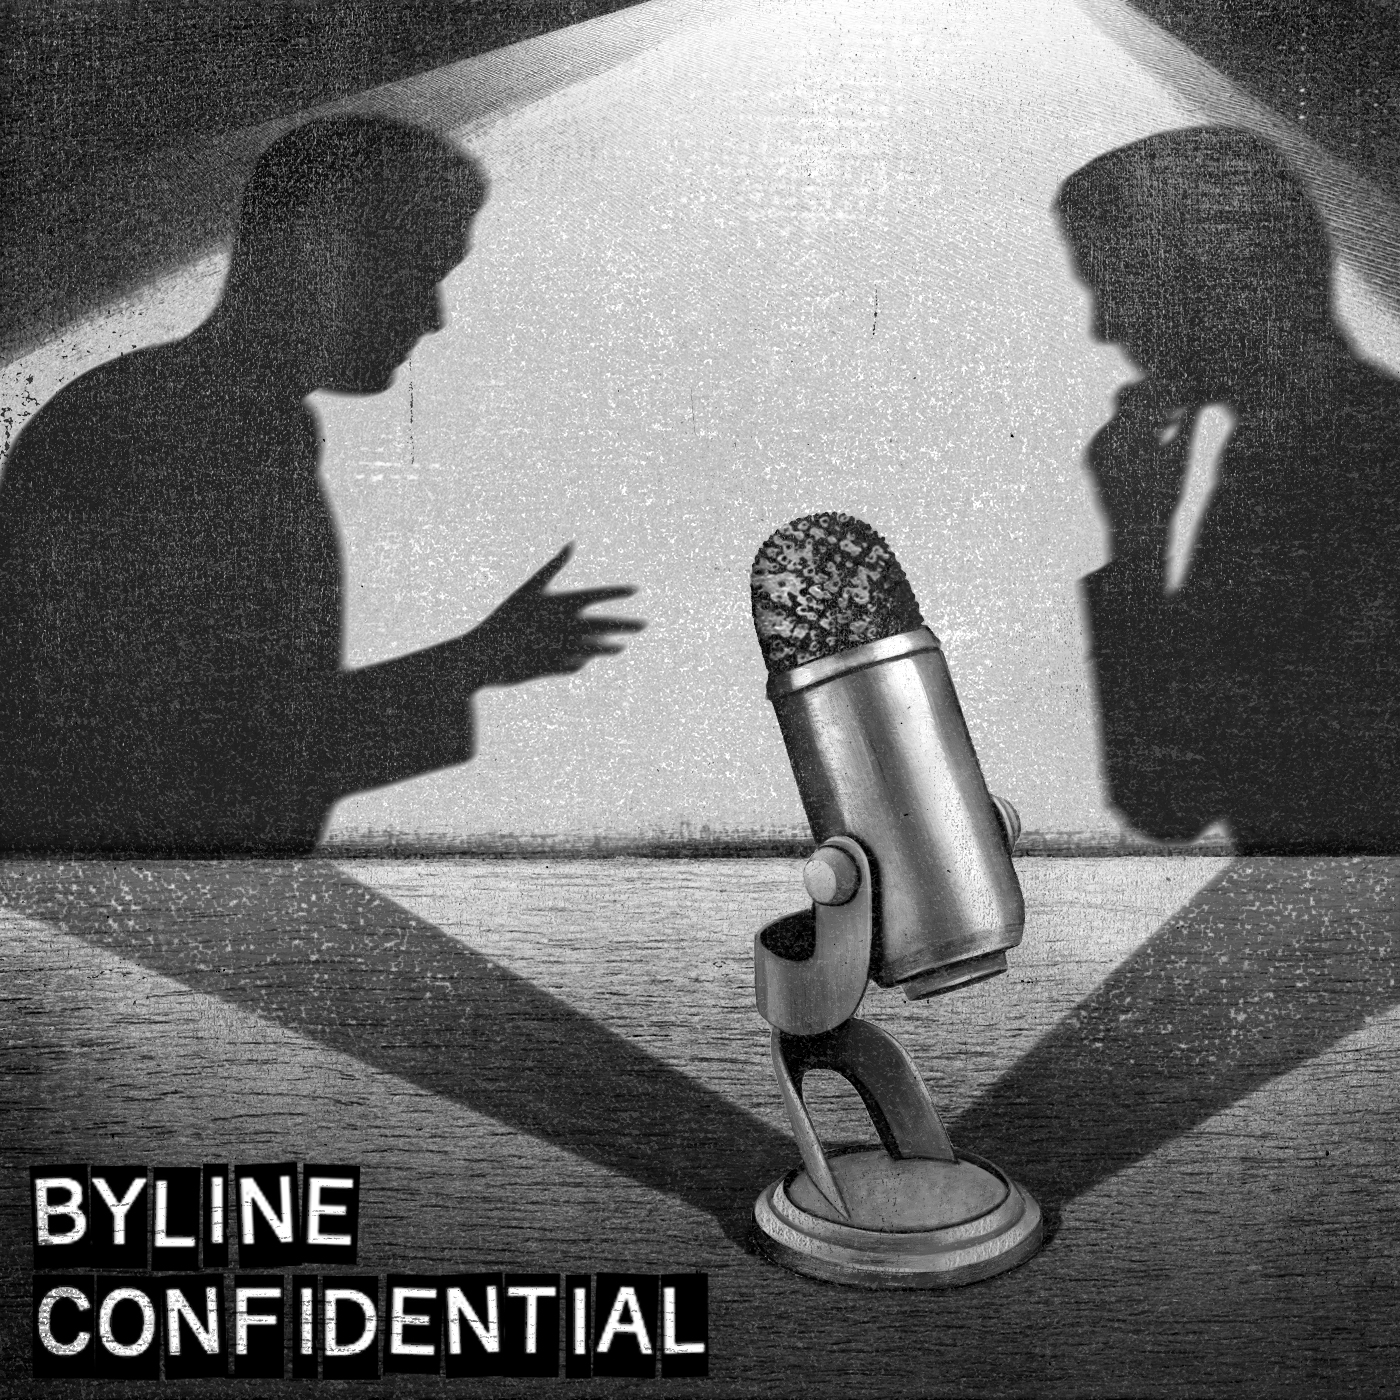 Byline Confidential